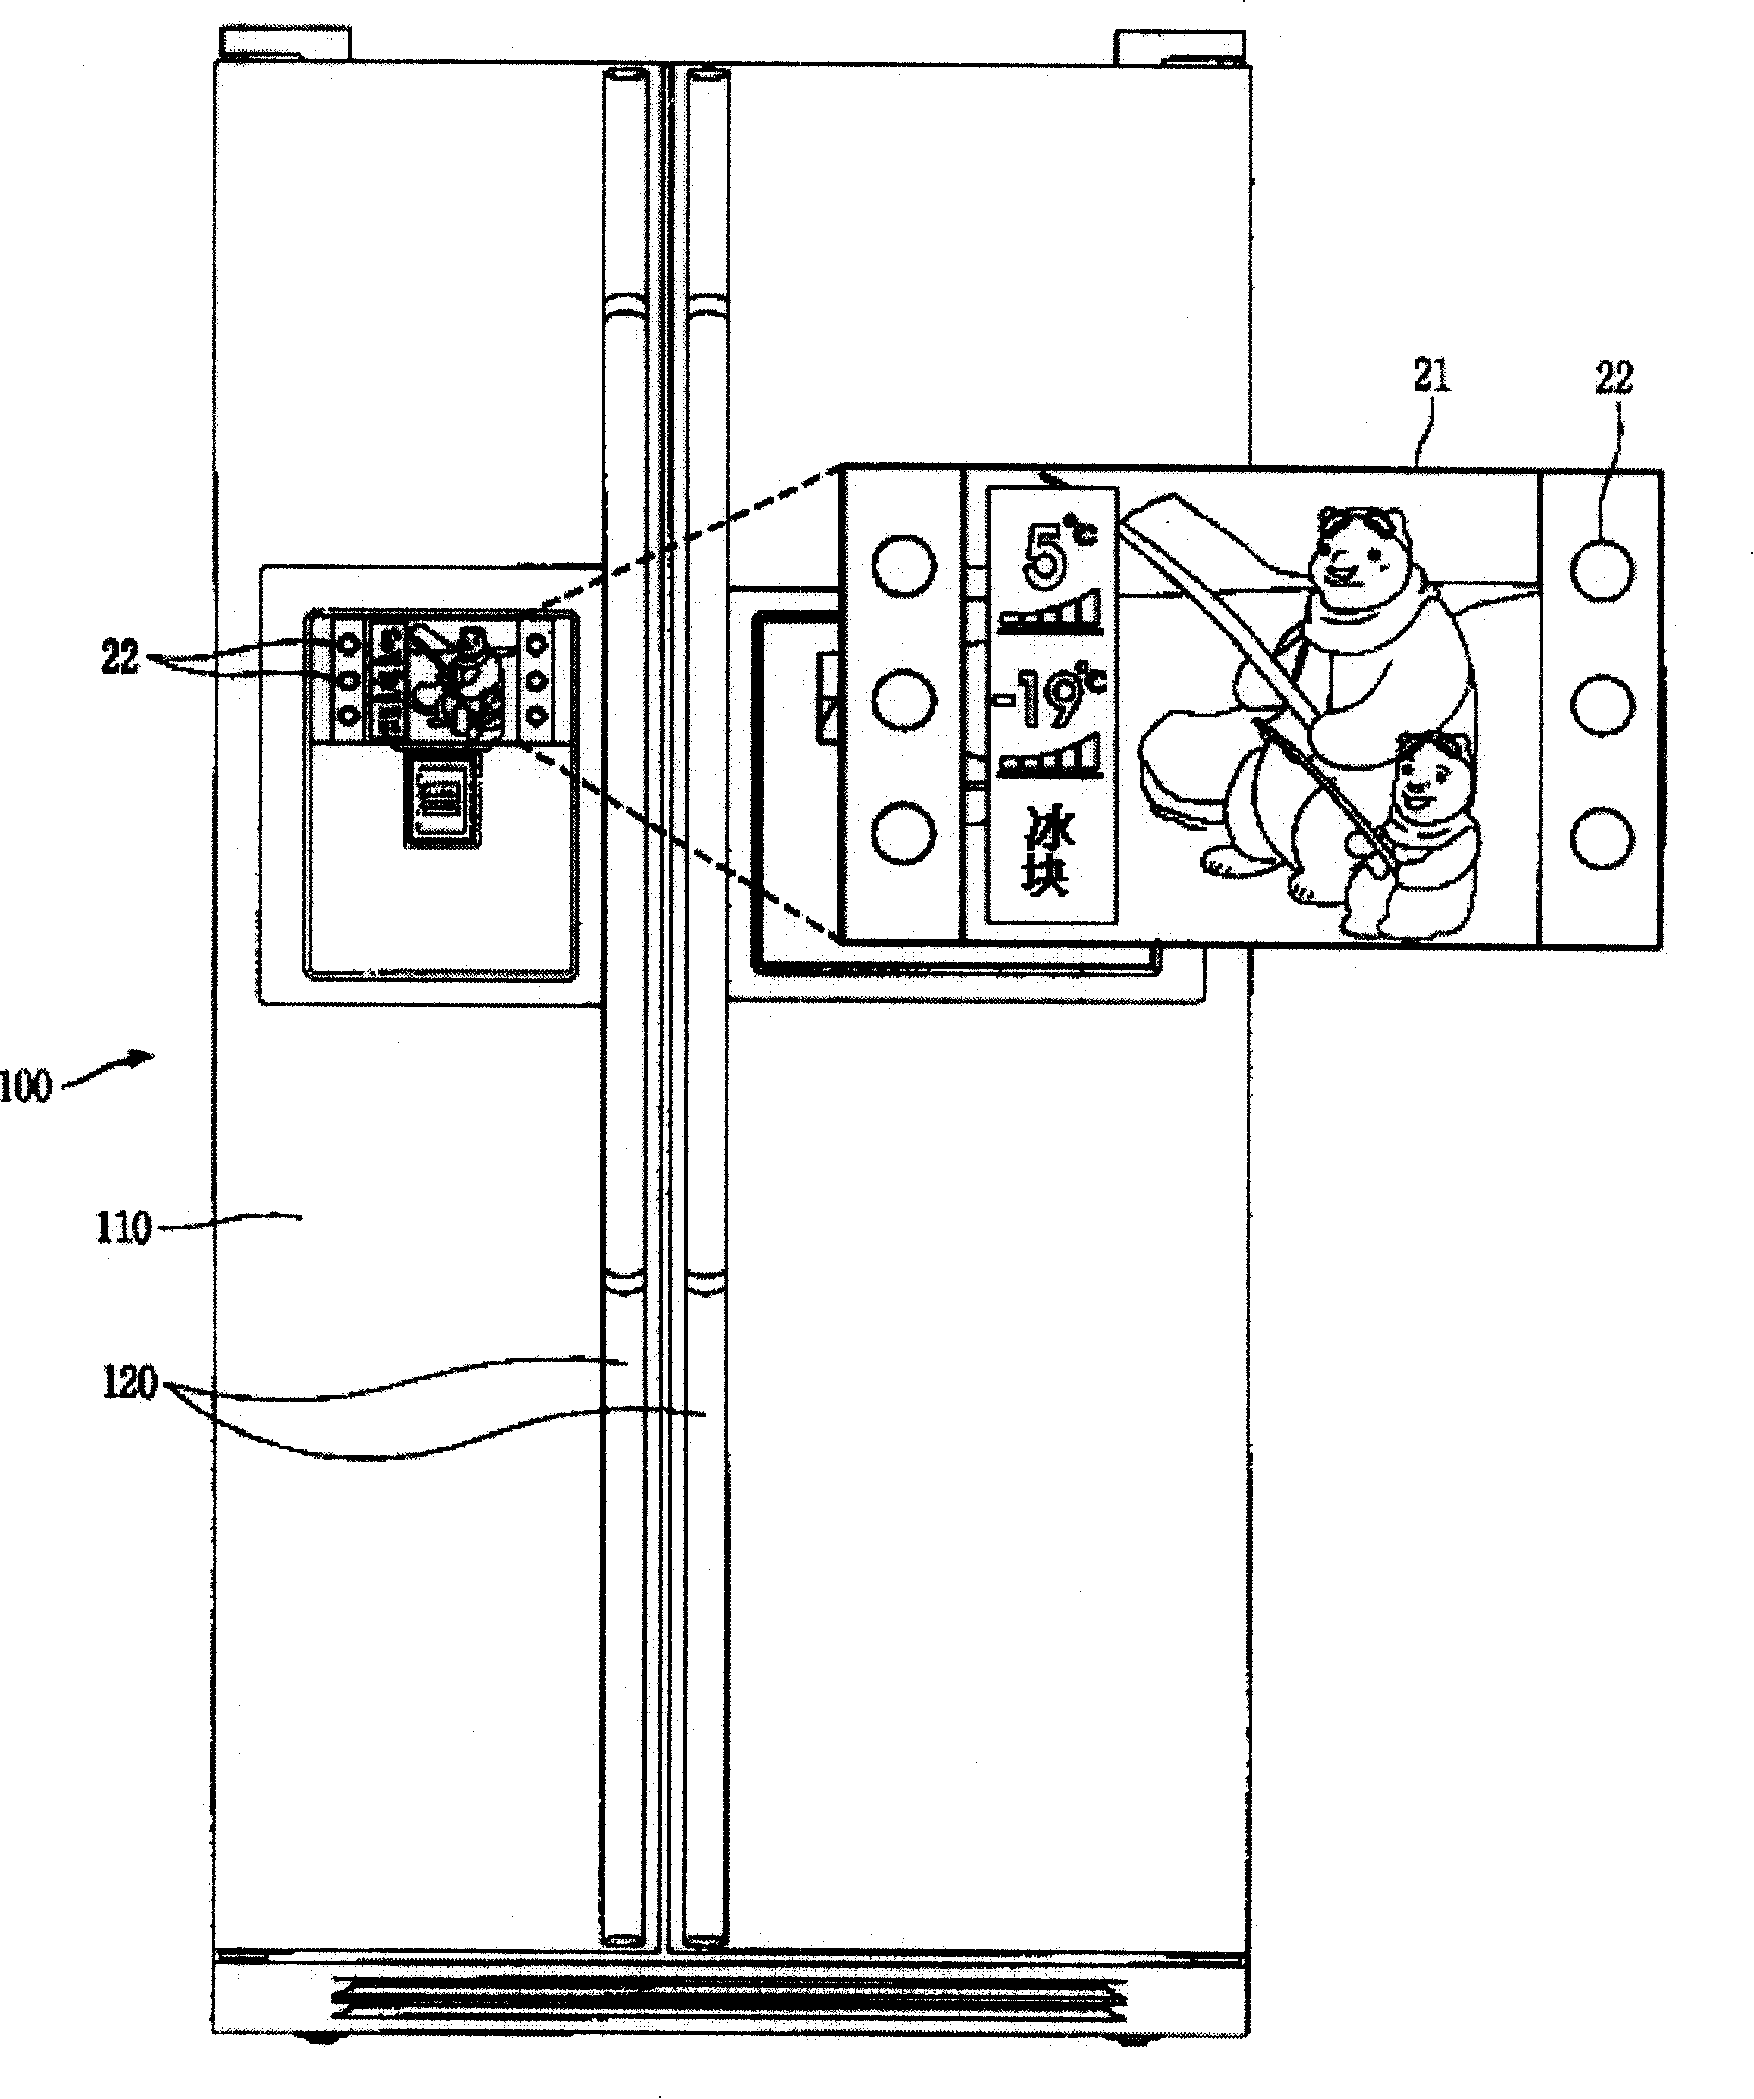 Refrigerator with fault information leading function